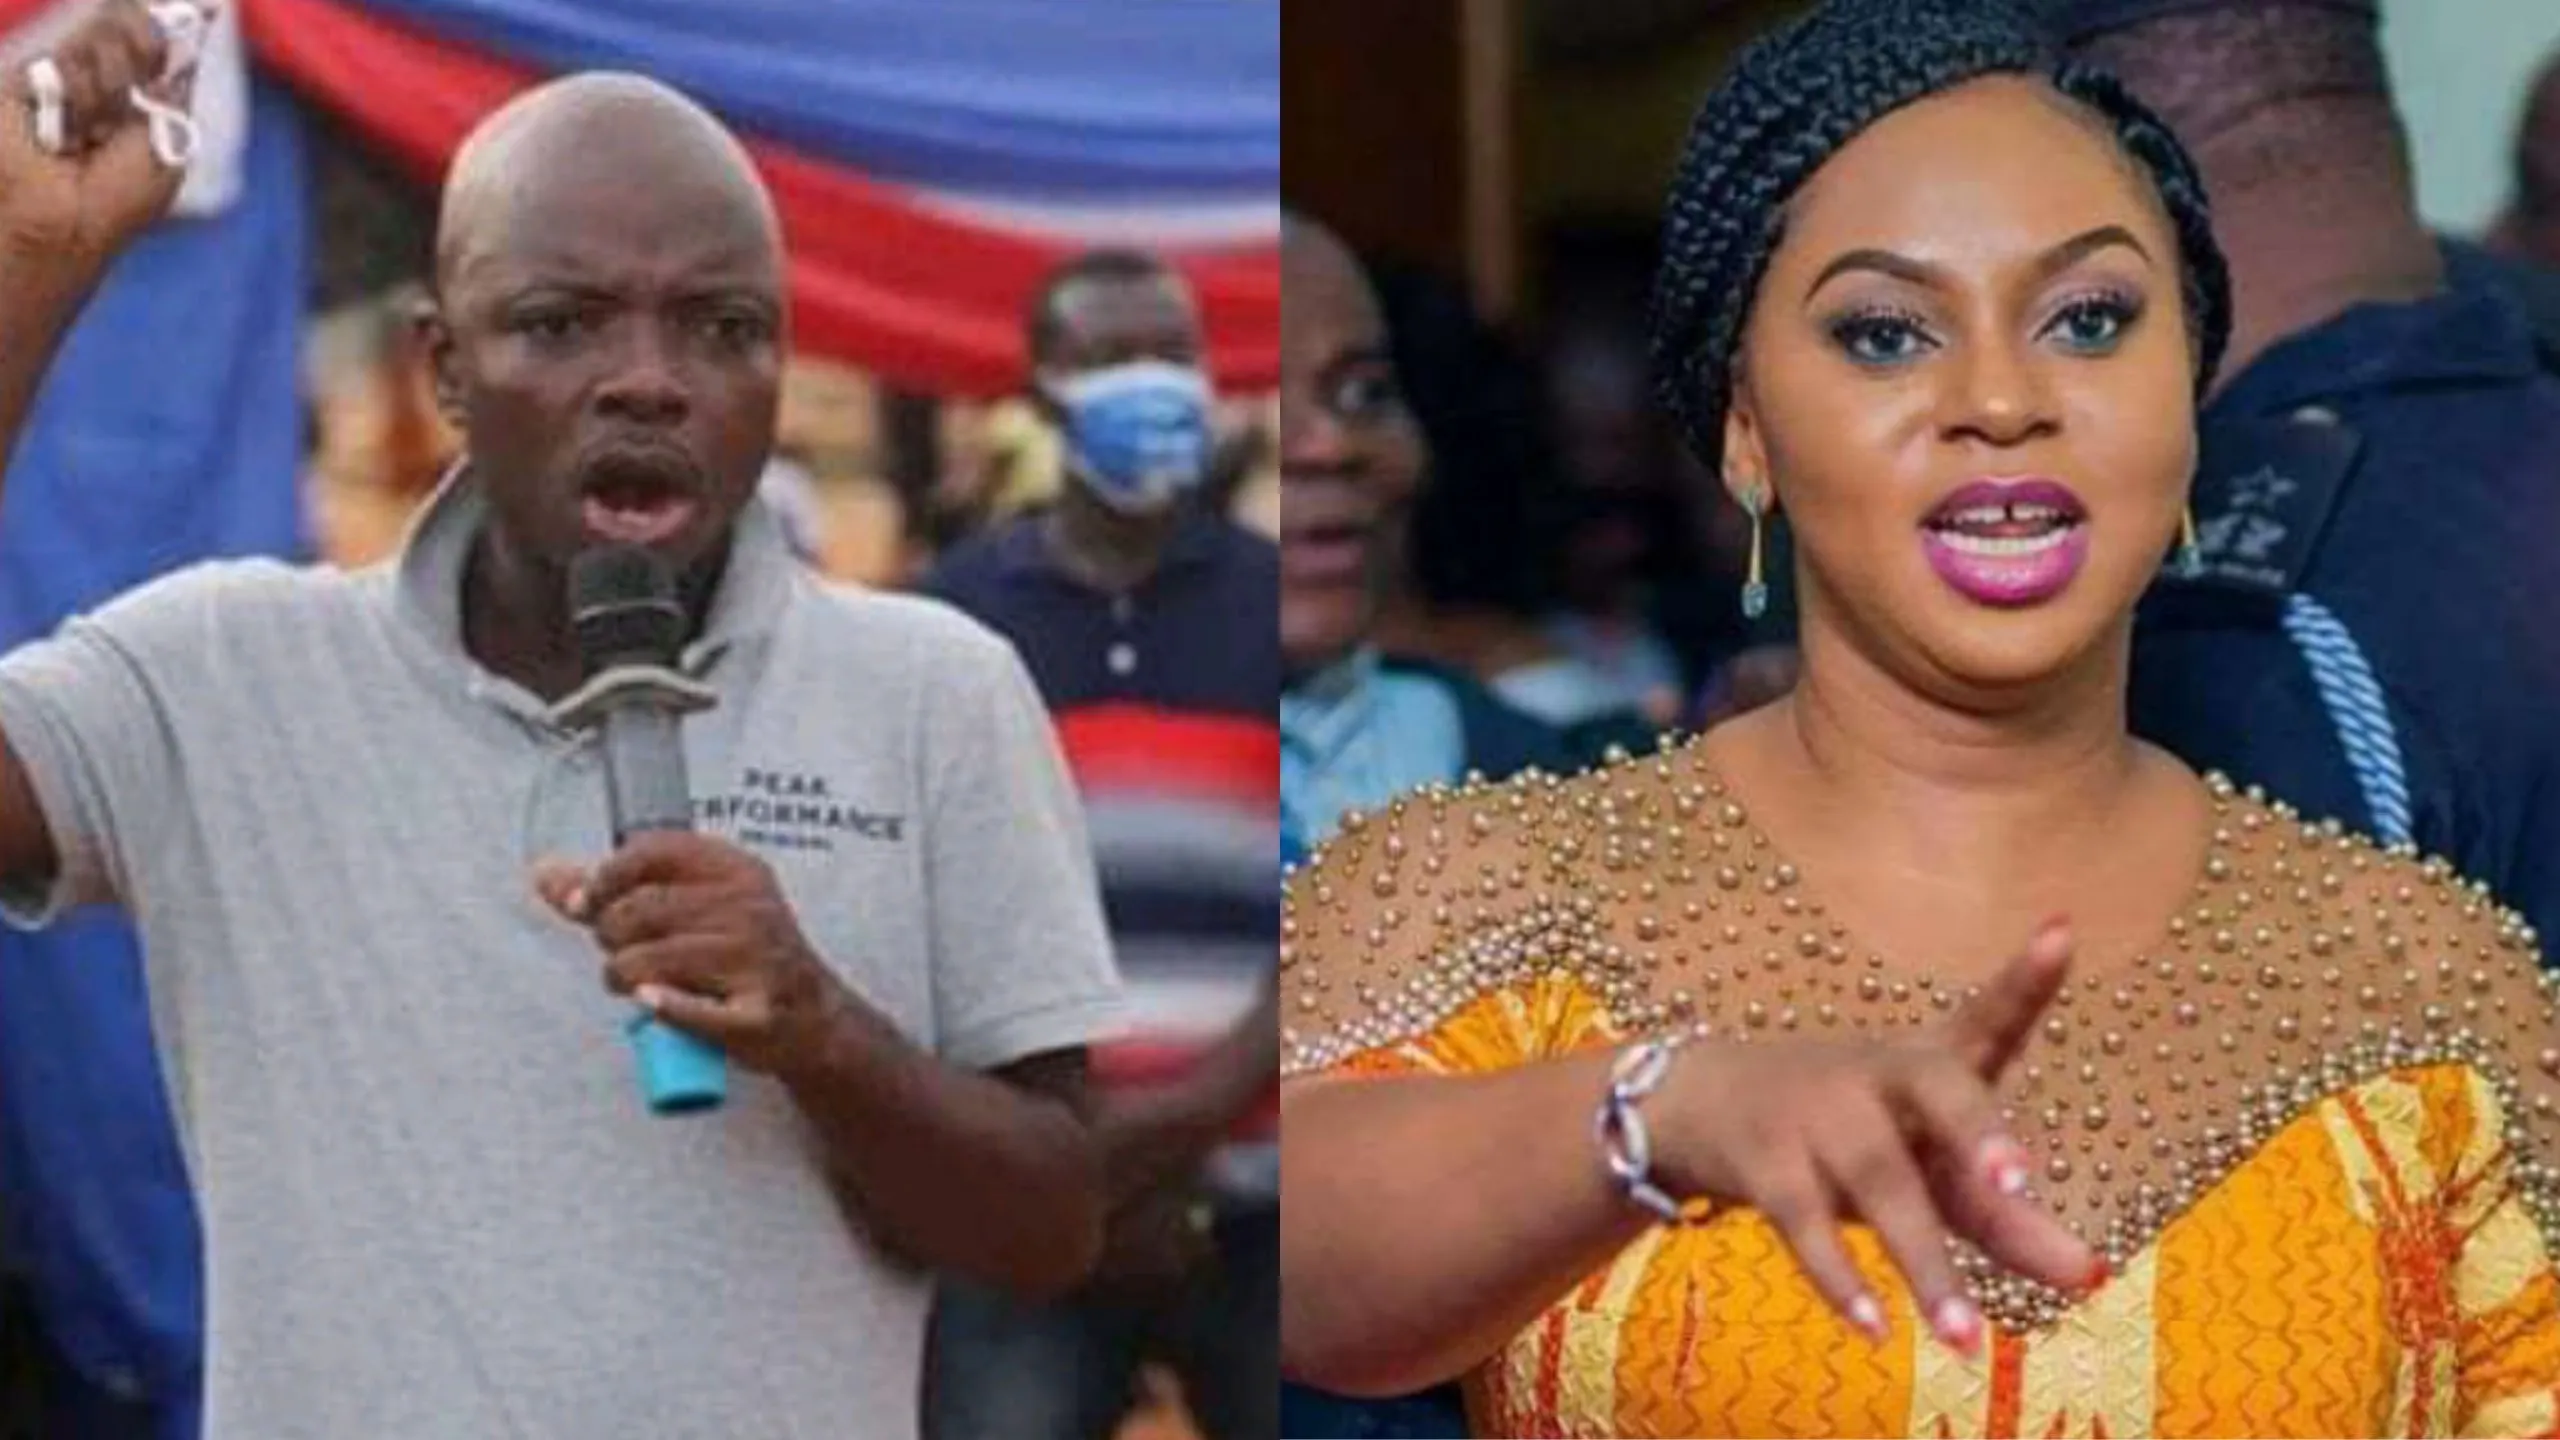 I Will Contest Dome-Kwabenya If Adwoa Safo Is Sαcked - Abronye Joins Kennedy Agyapong, Blαsts Adwoa Safo